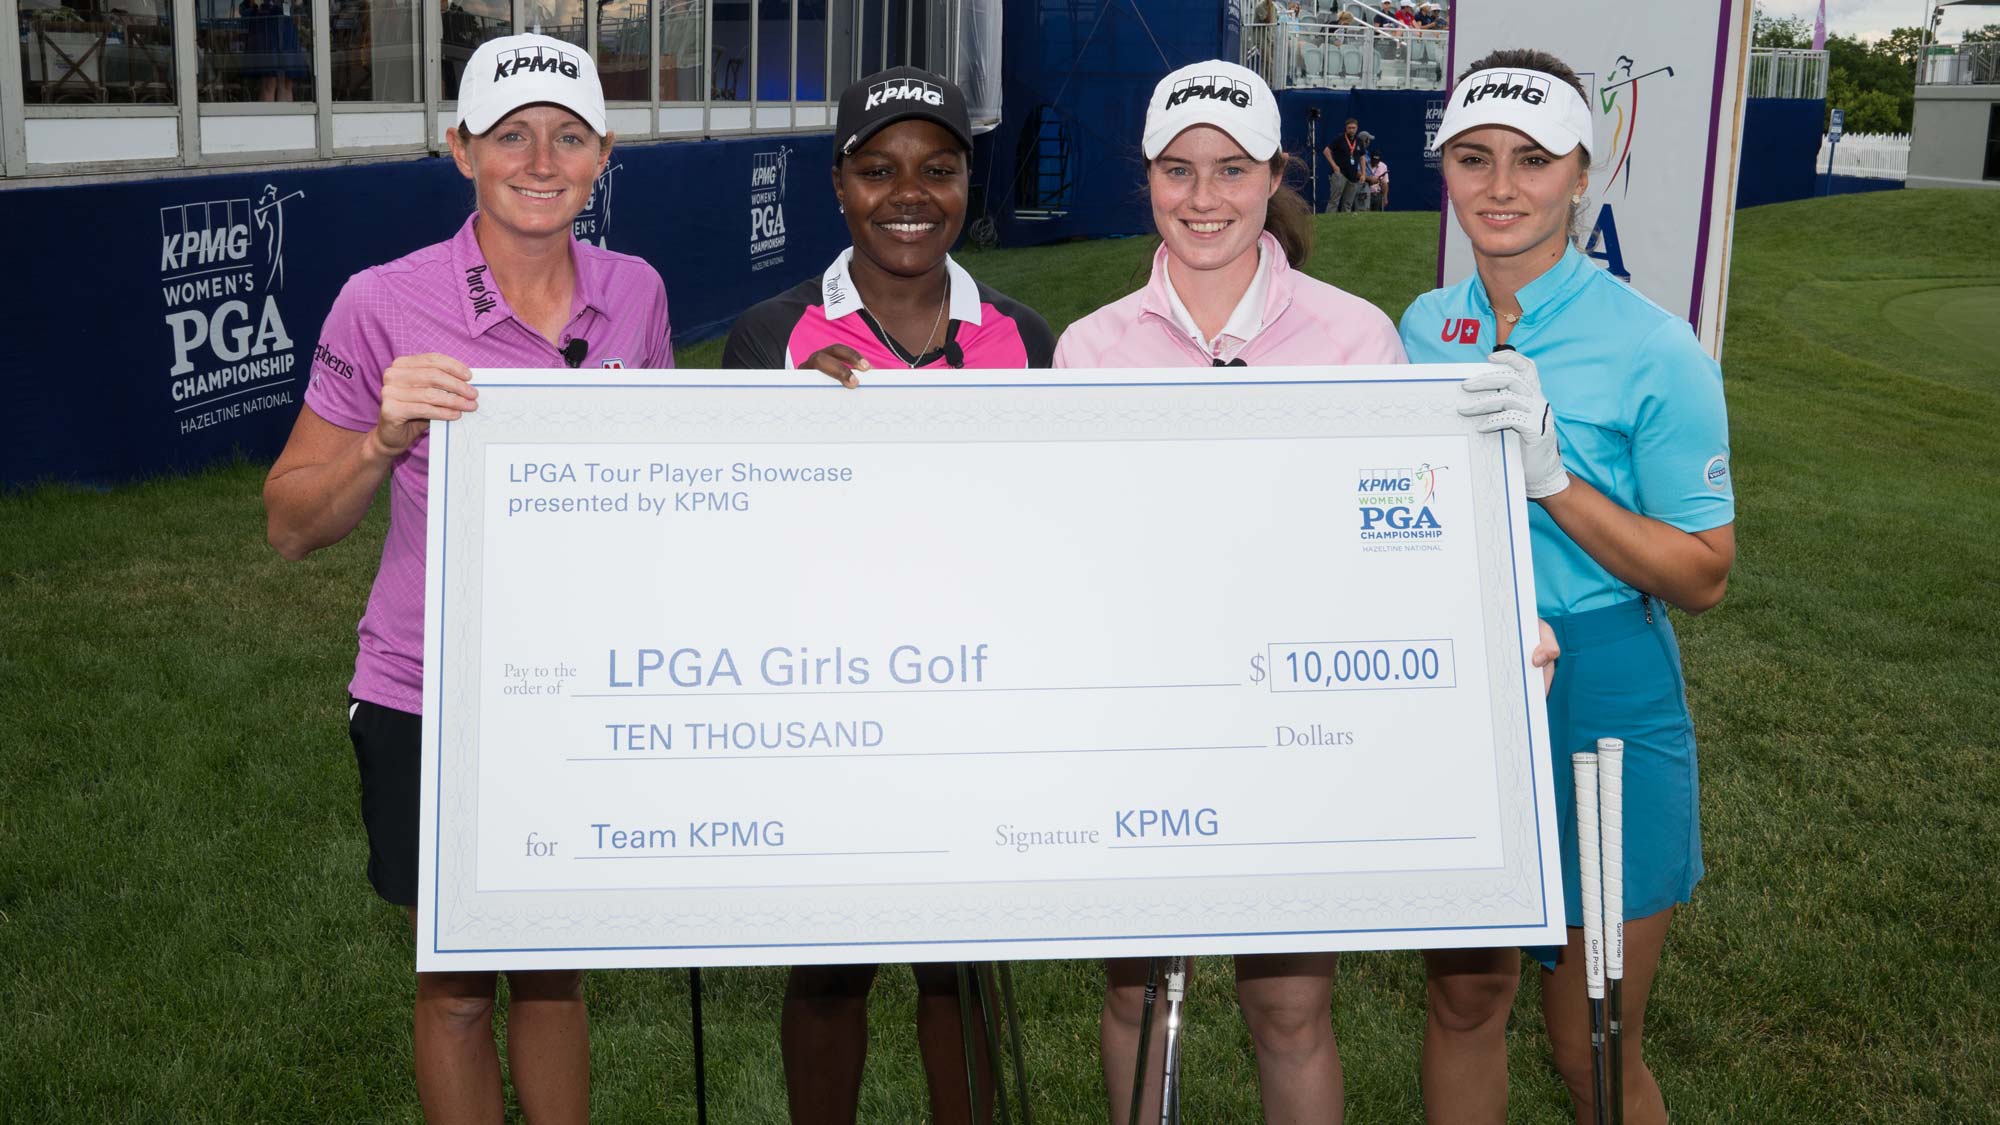 Stacy Lewis, Mariah Stackhouse, Leona Maguire and Klara Spilkova pose for a photo with the winning check during the KPMG Player Showcase for the 65th KPMG Women’s PGA Championship